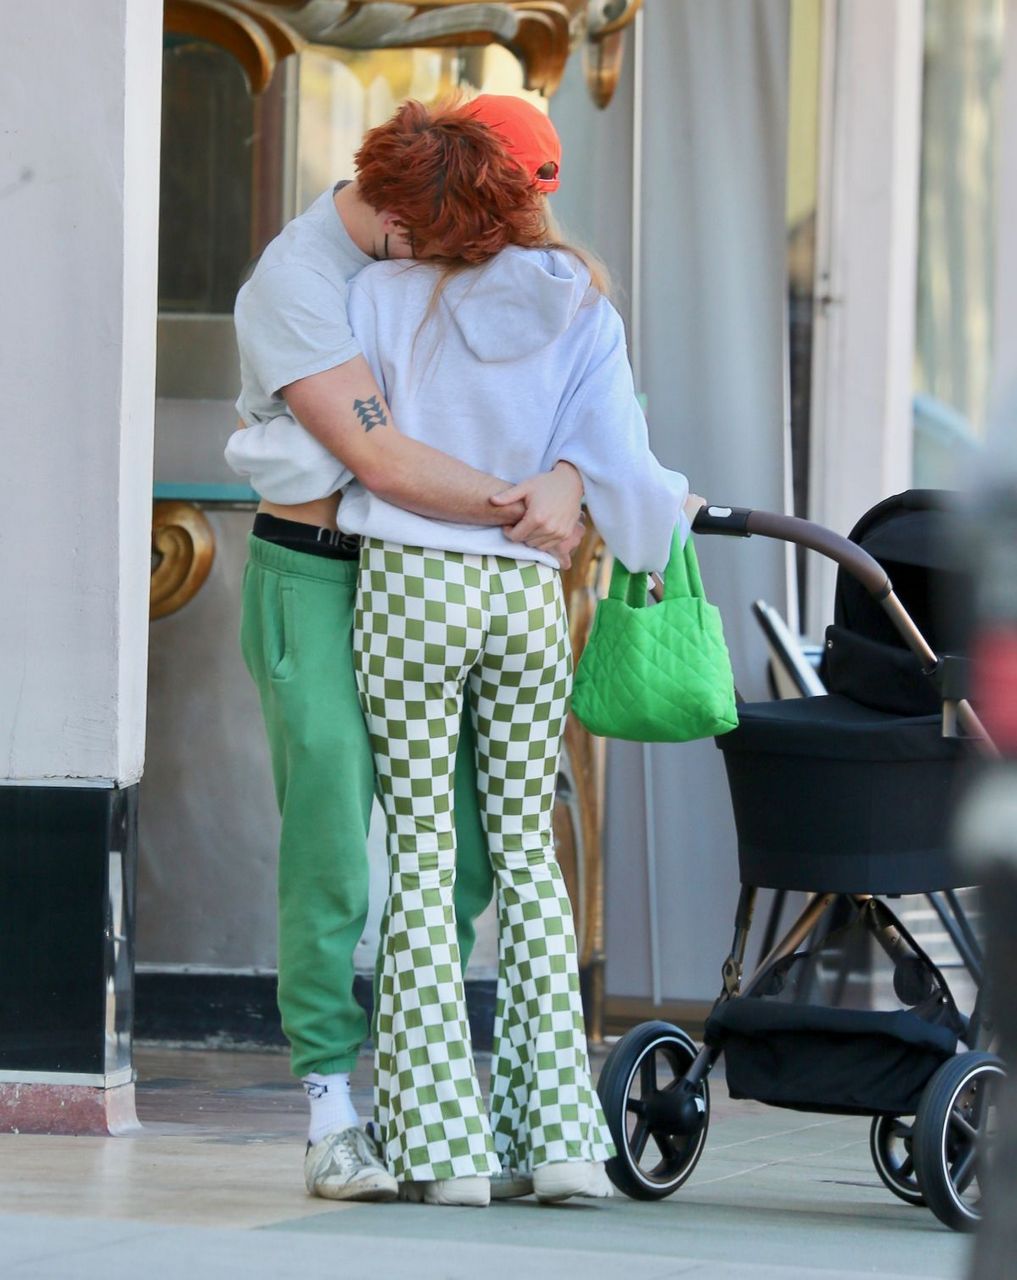 Clara Berry And Kj Apa Out With Their Baby Los Angeles